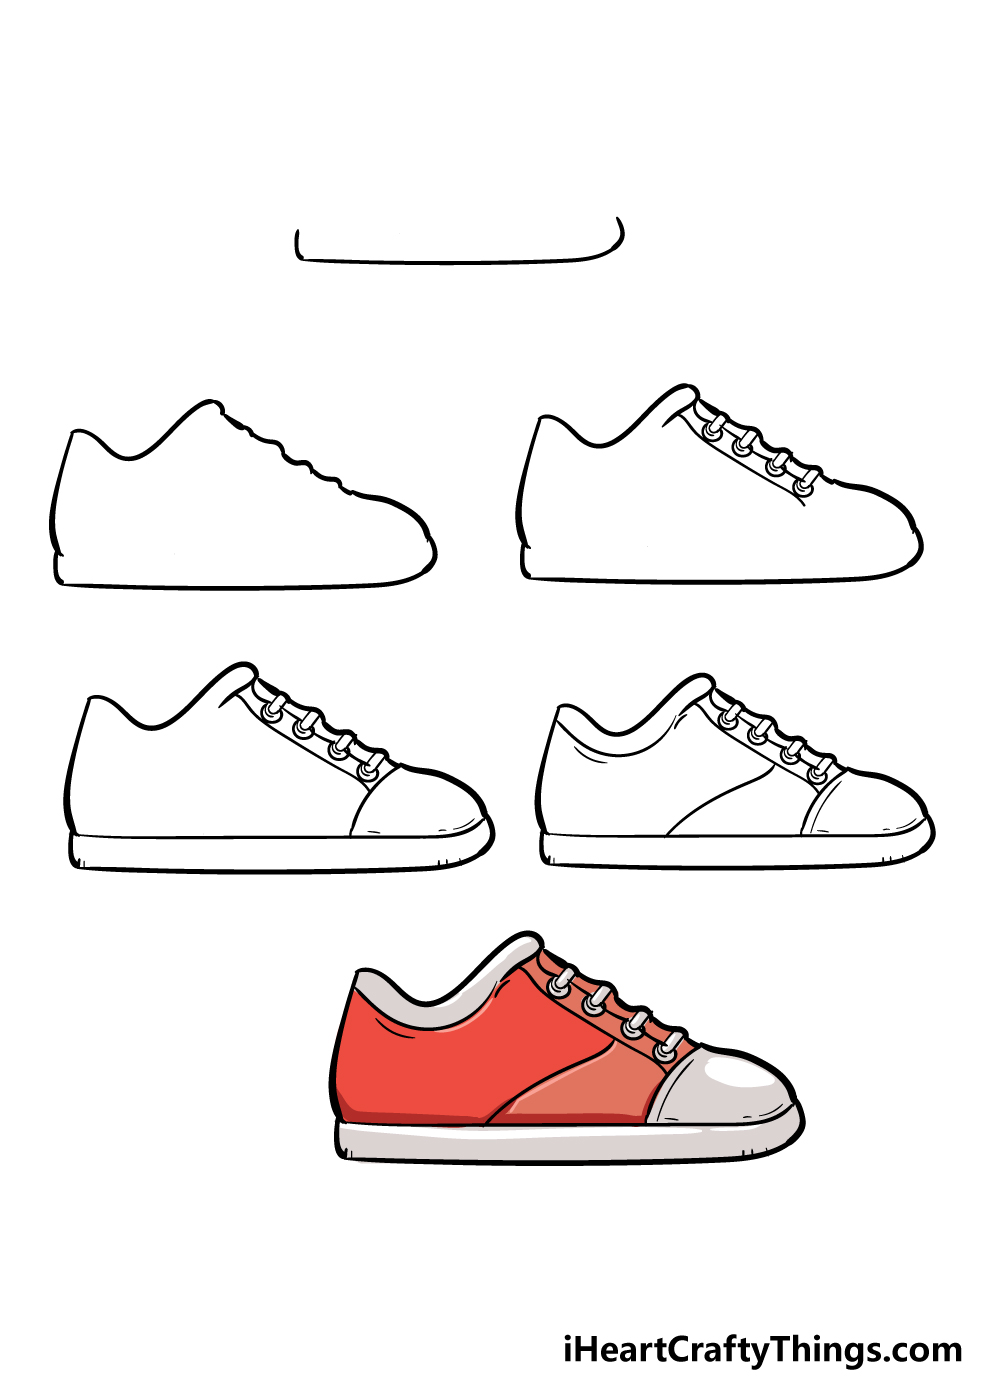 how to draw shoe in 6 steps